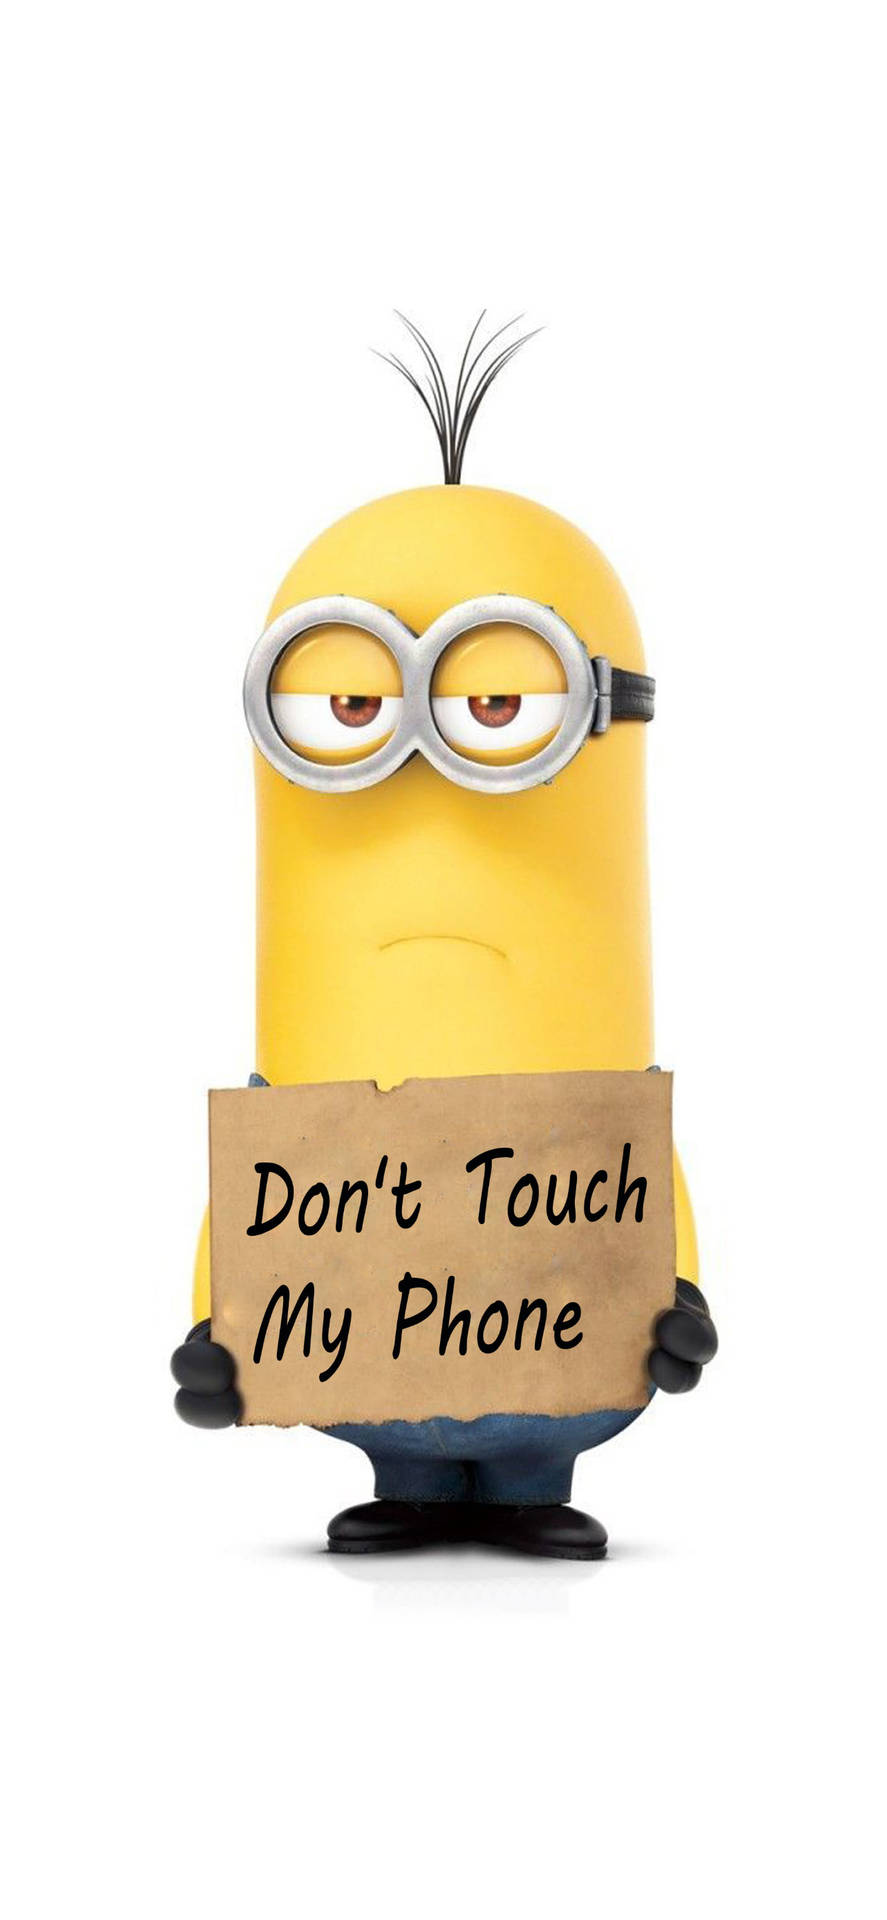 Despicable Me Don't Touch My Phone wallpaper.